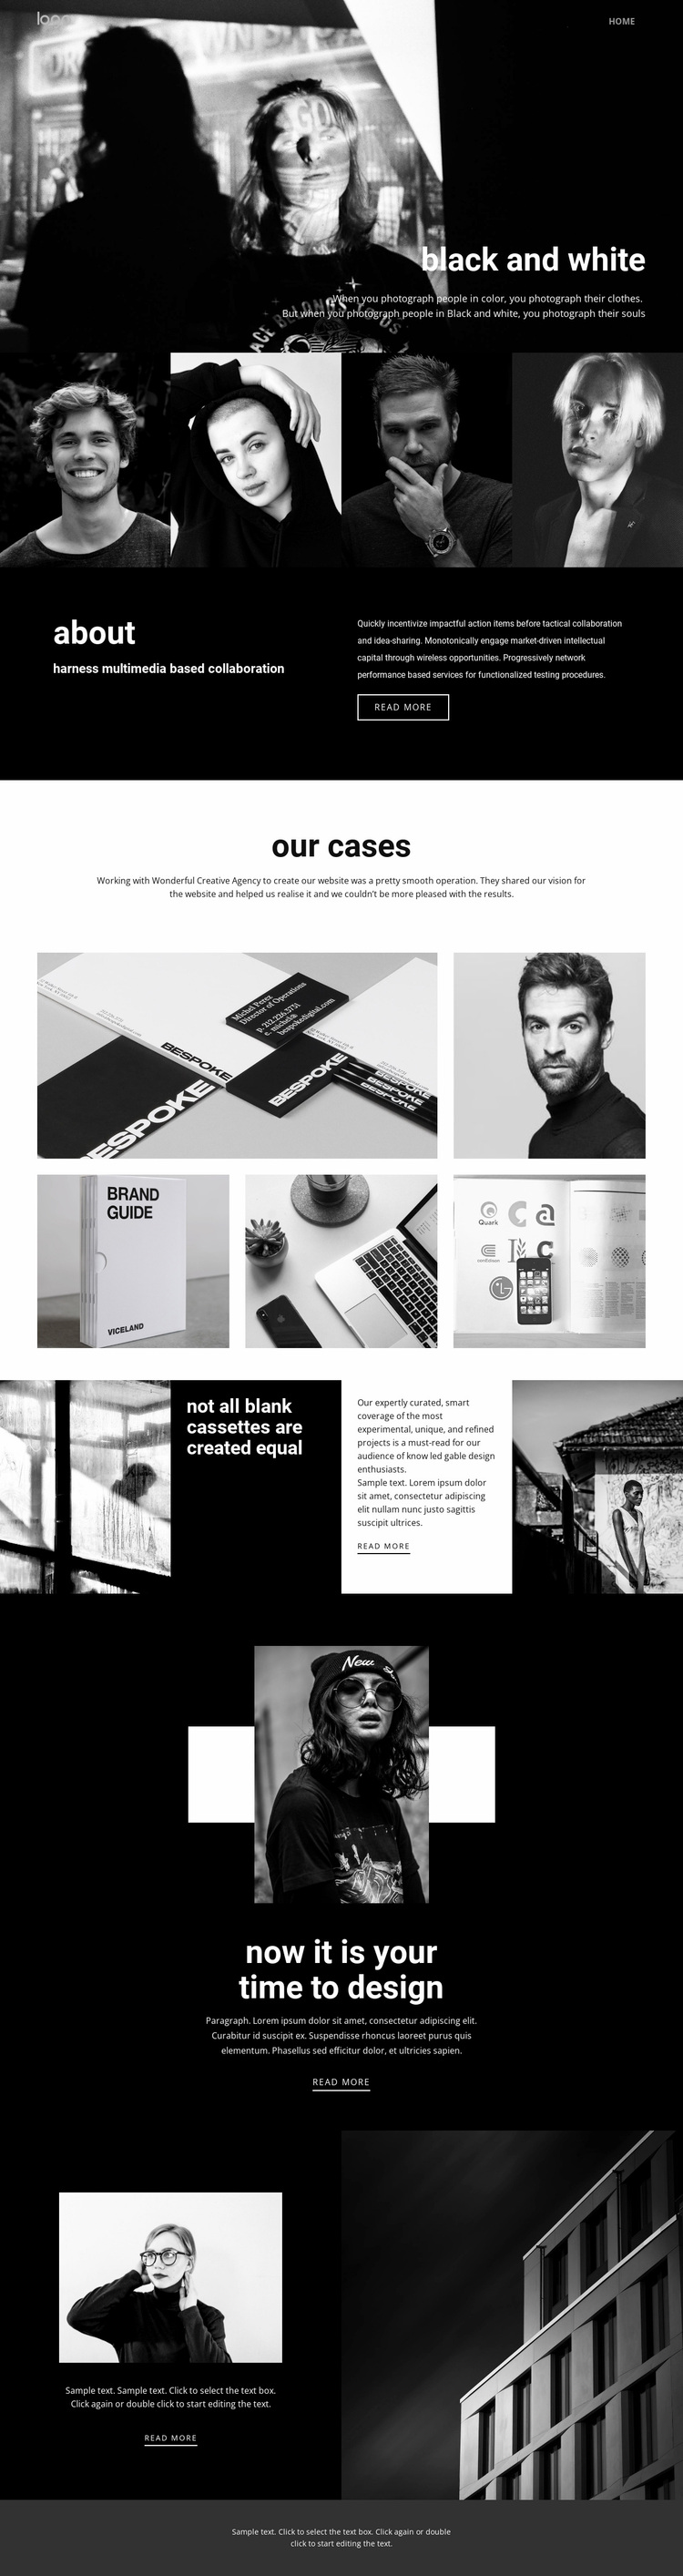 Black and white colors of art Website Design